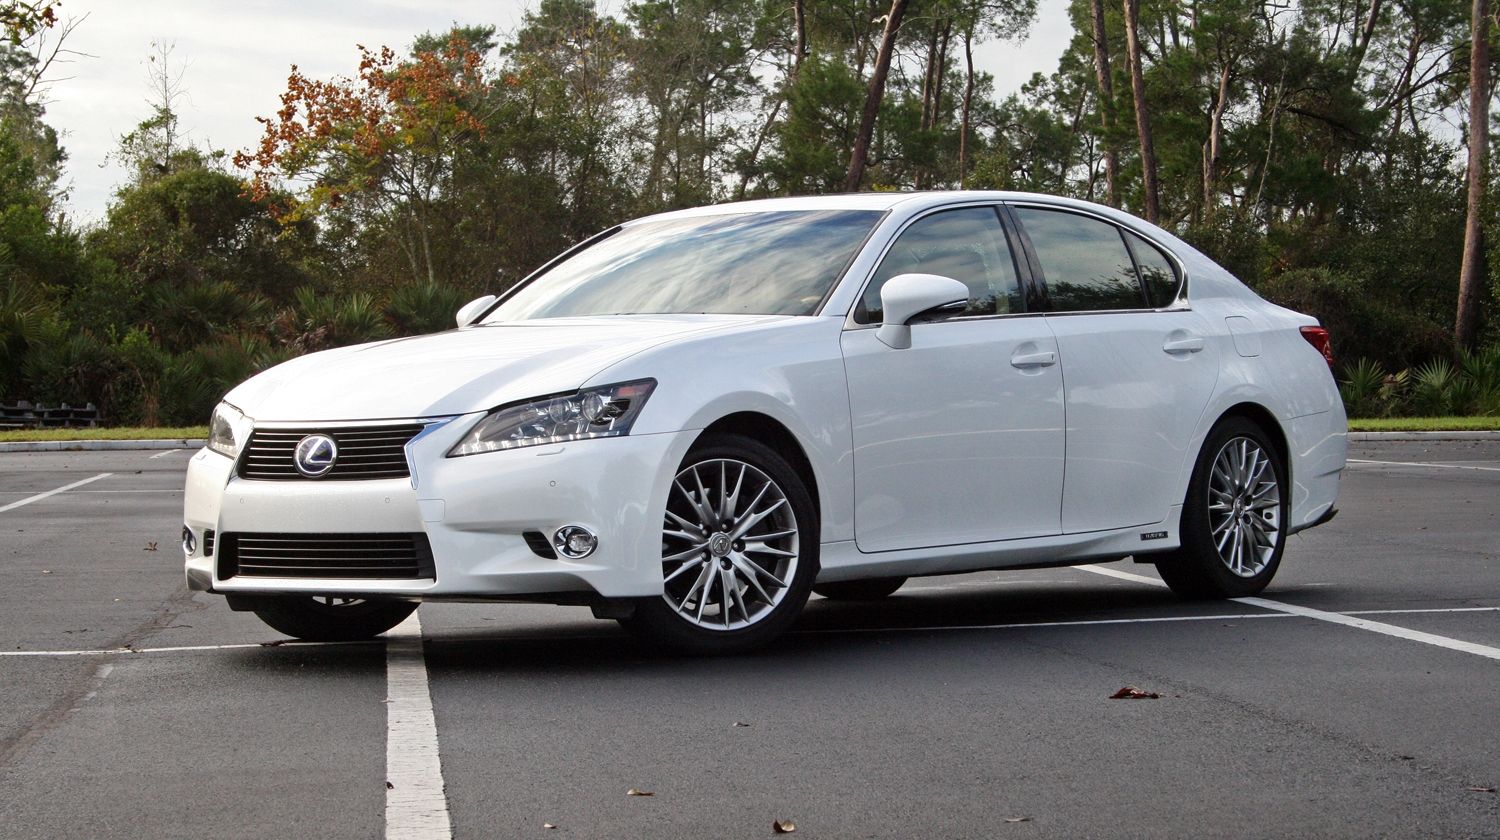  Mark McNabb spent a week with the large, luxurious, AND fuel-efficient Lexus GS450h. Check out what he thought of it at TopSpeed.com.